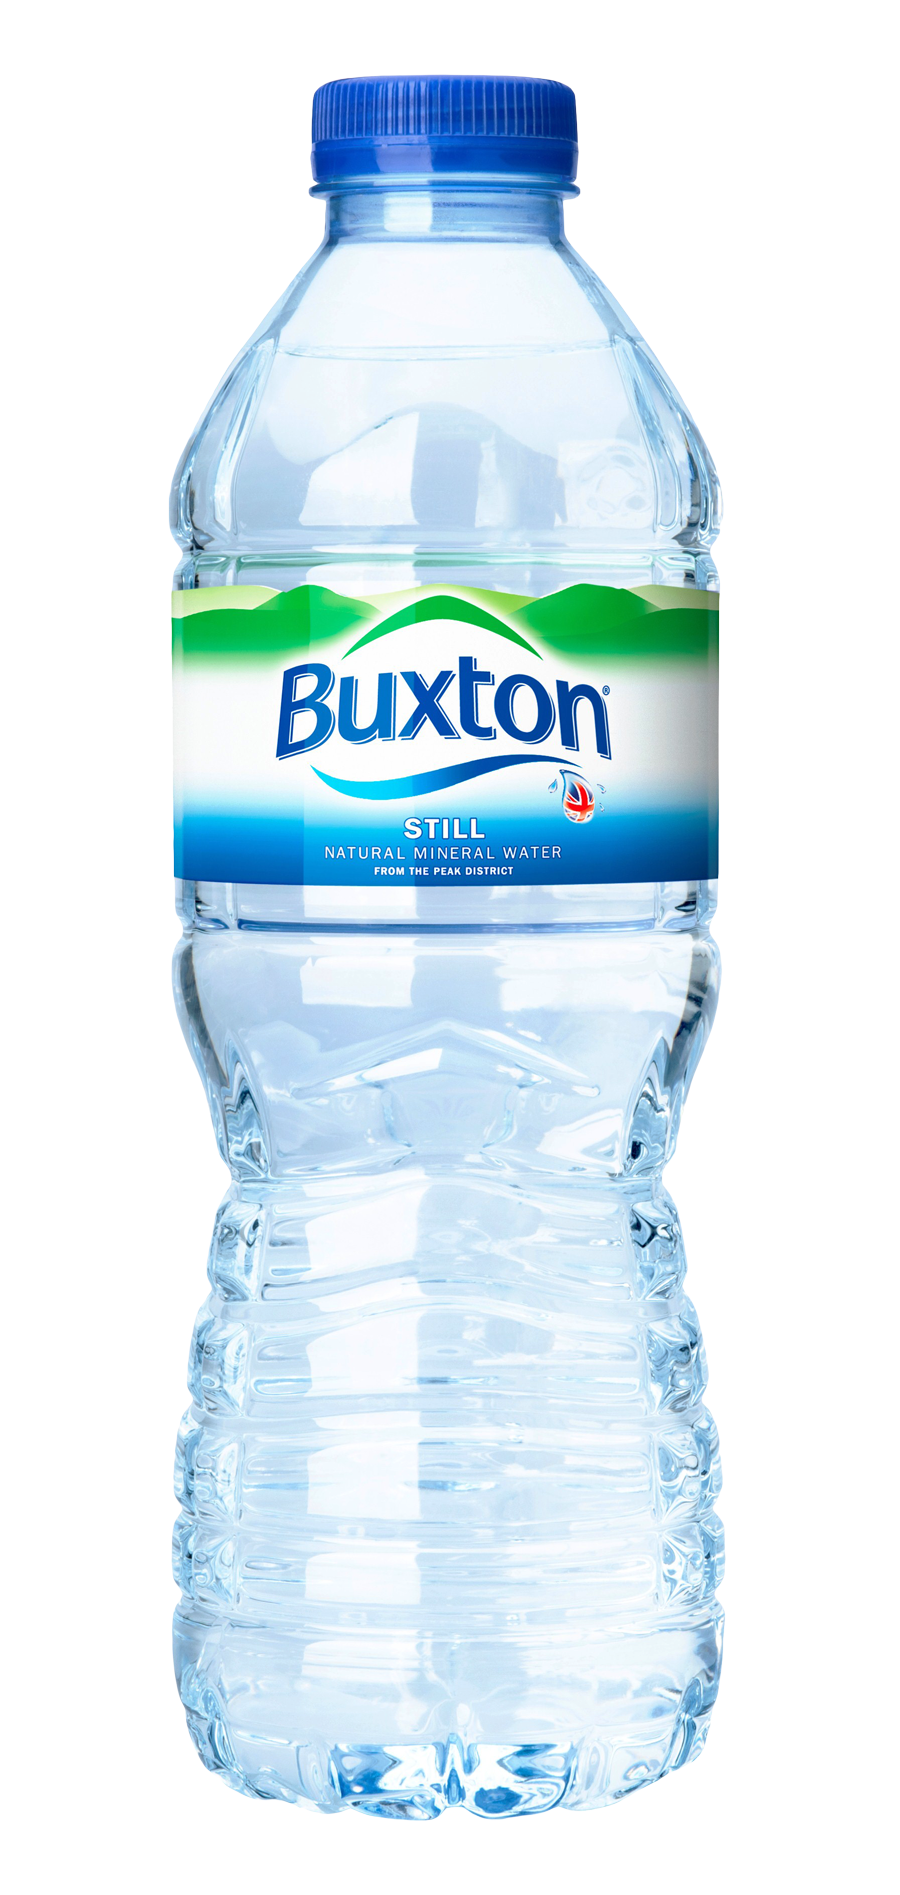 Water Bottle PNG Free Photo PNG Image